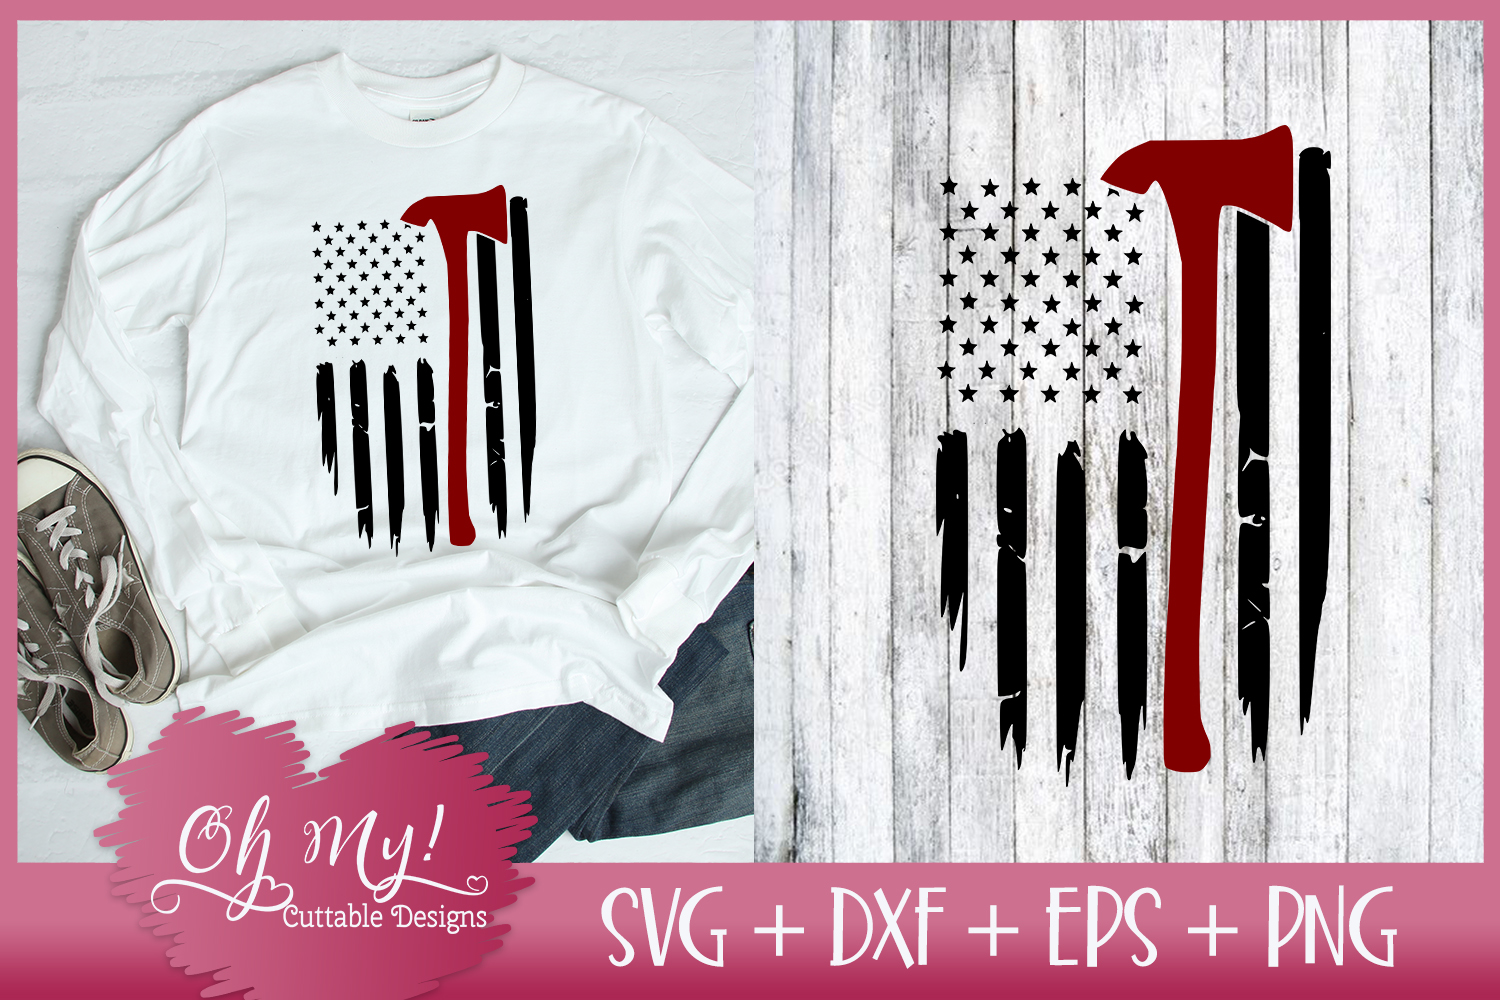 Download Distresses Flag with Axe - SVG DXF EPS PNG Cutting File ...